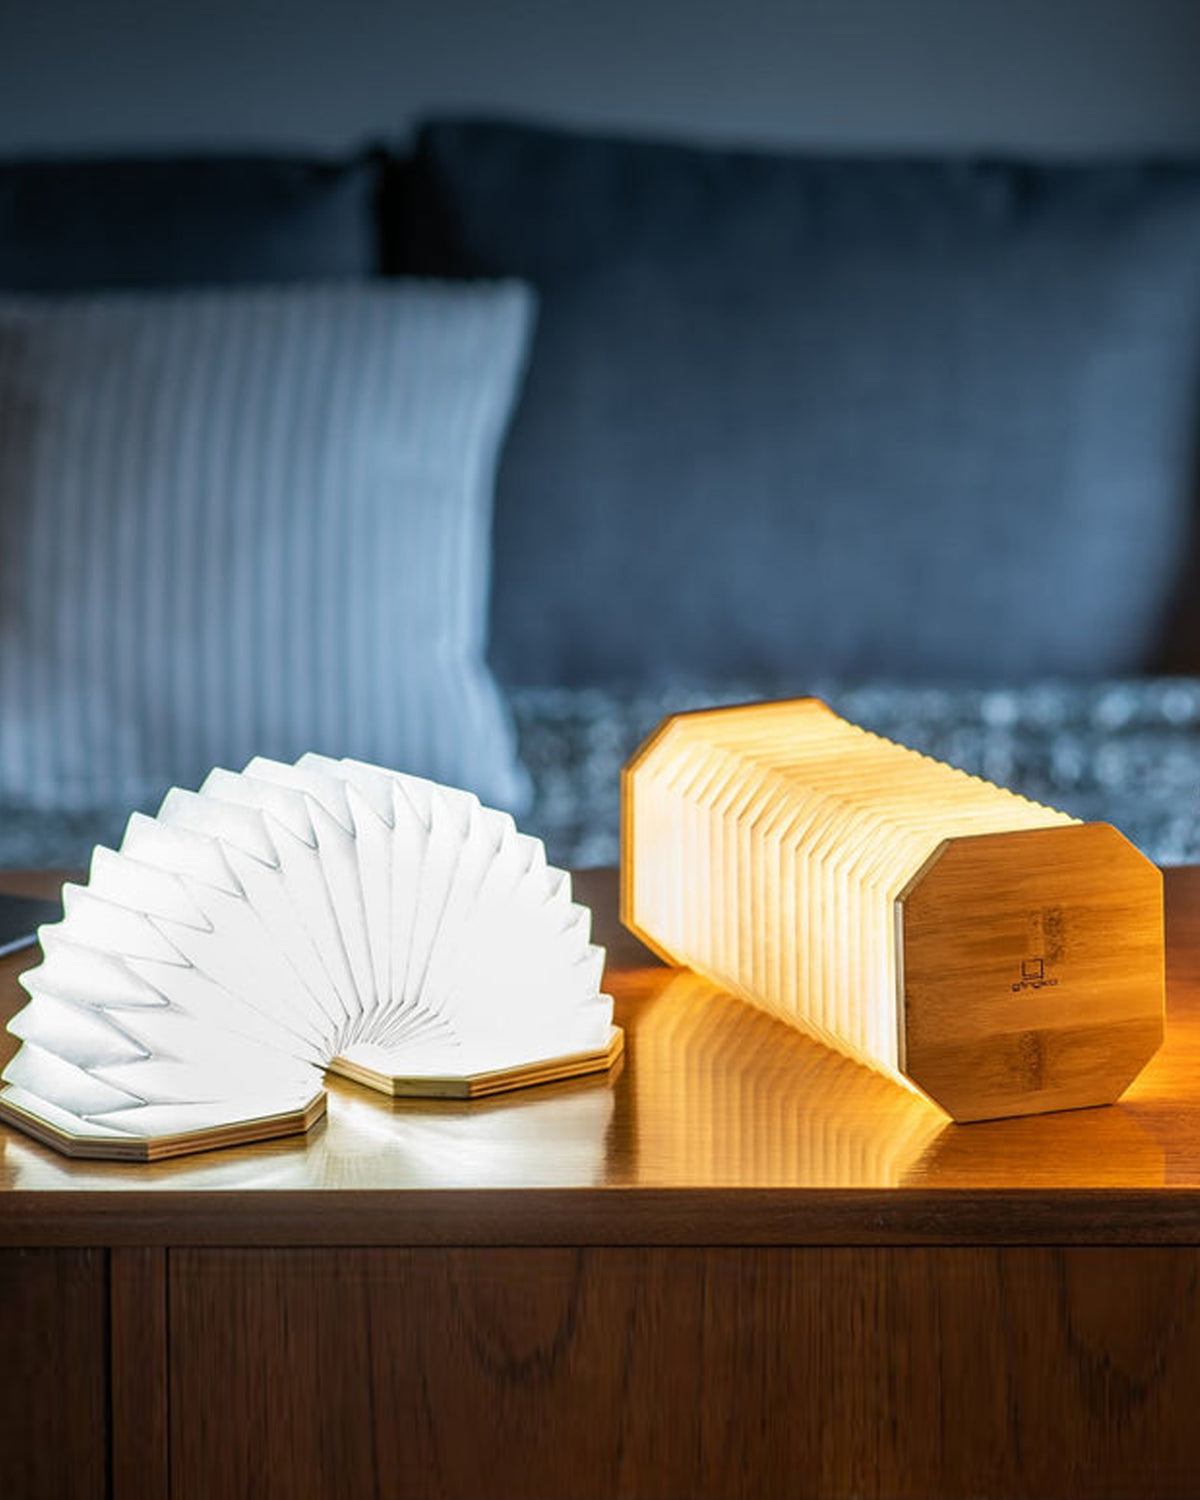 This beautiful accordion-inspired ambient light transforms into whatever shape you want, and it is also a perfect example of a lighting design that doesn't just illuminate, it interacts too!   The folding/foldable lamp comes a pleated Tyvek-paper shade sitting between two pieces of wood.